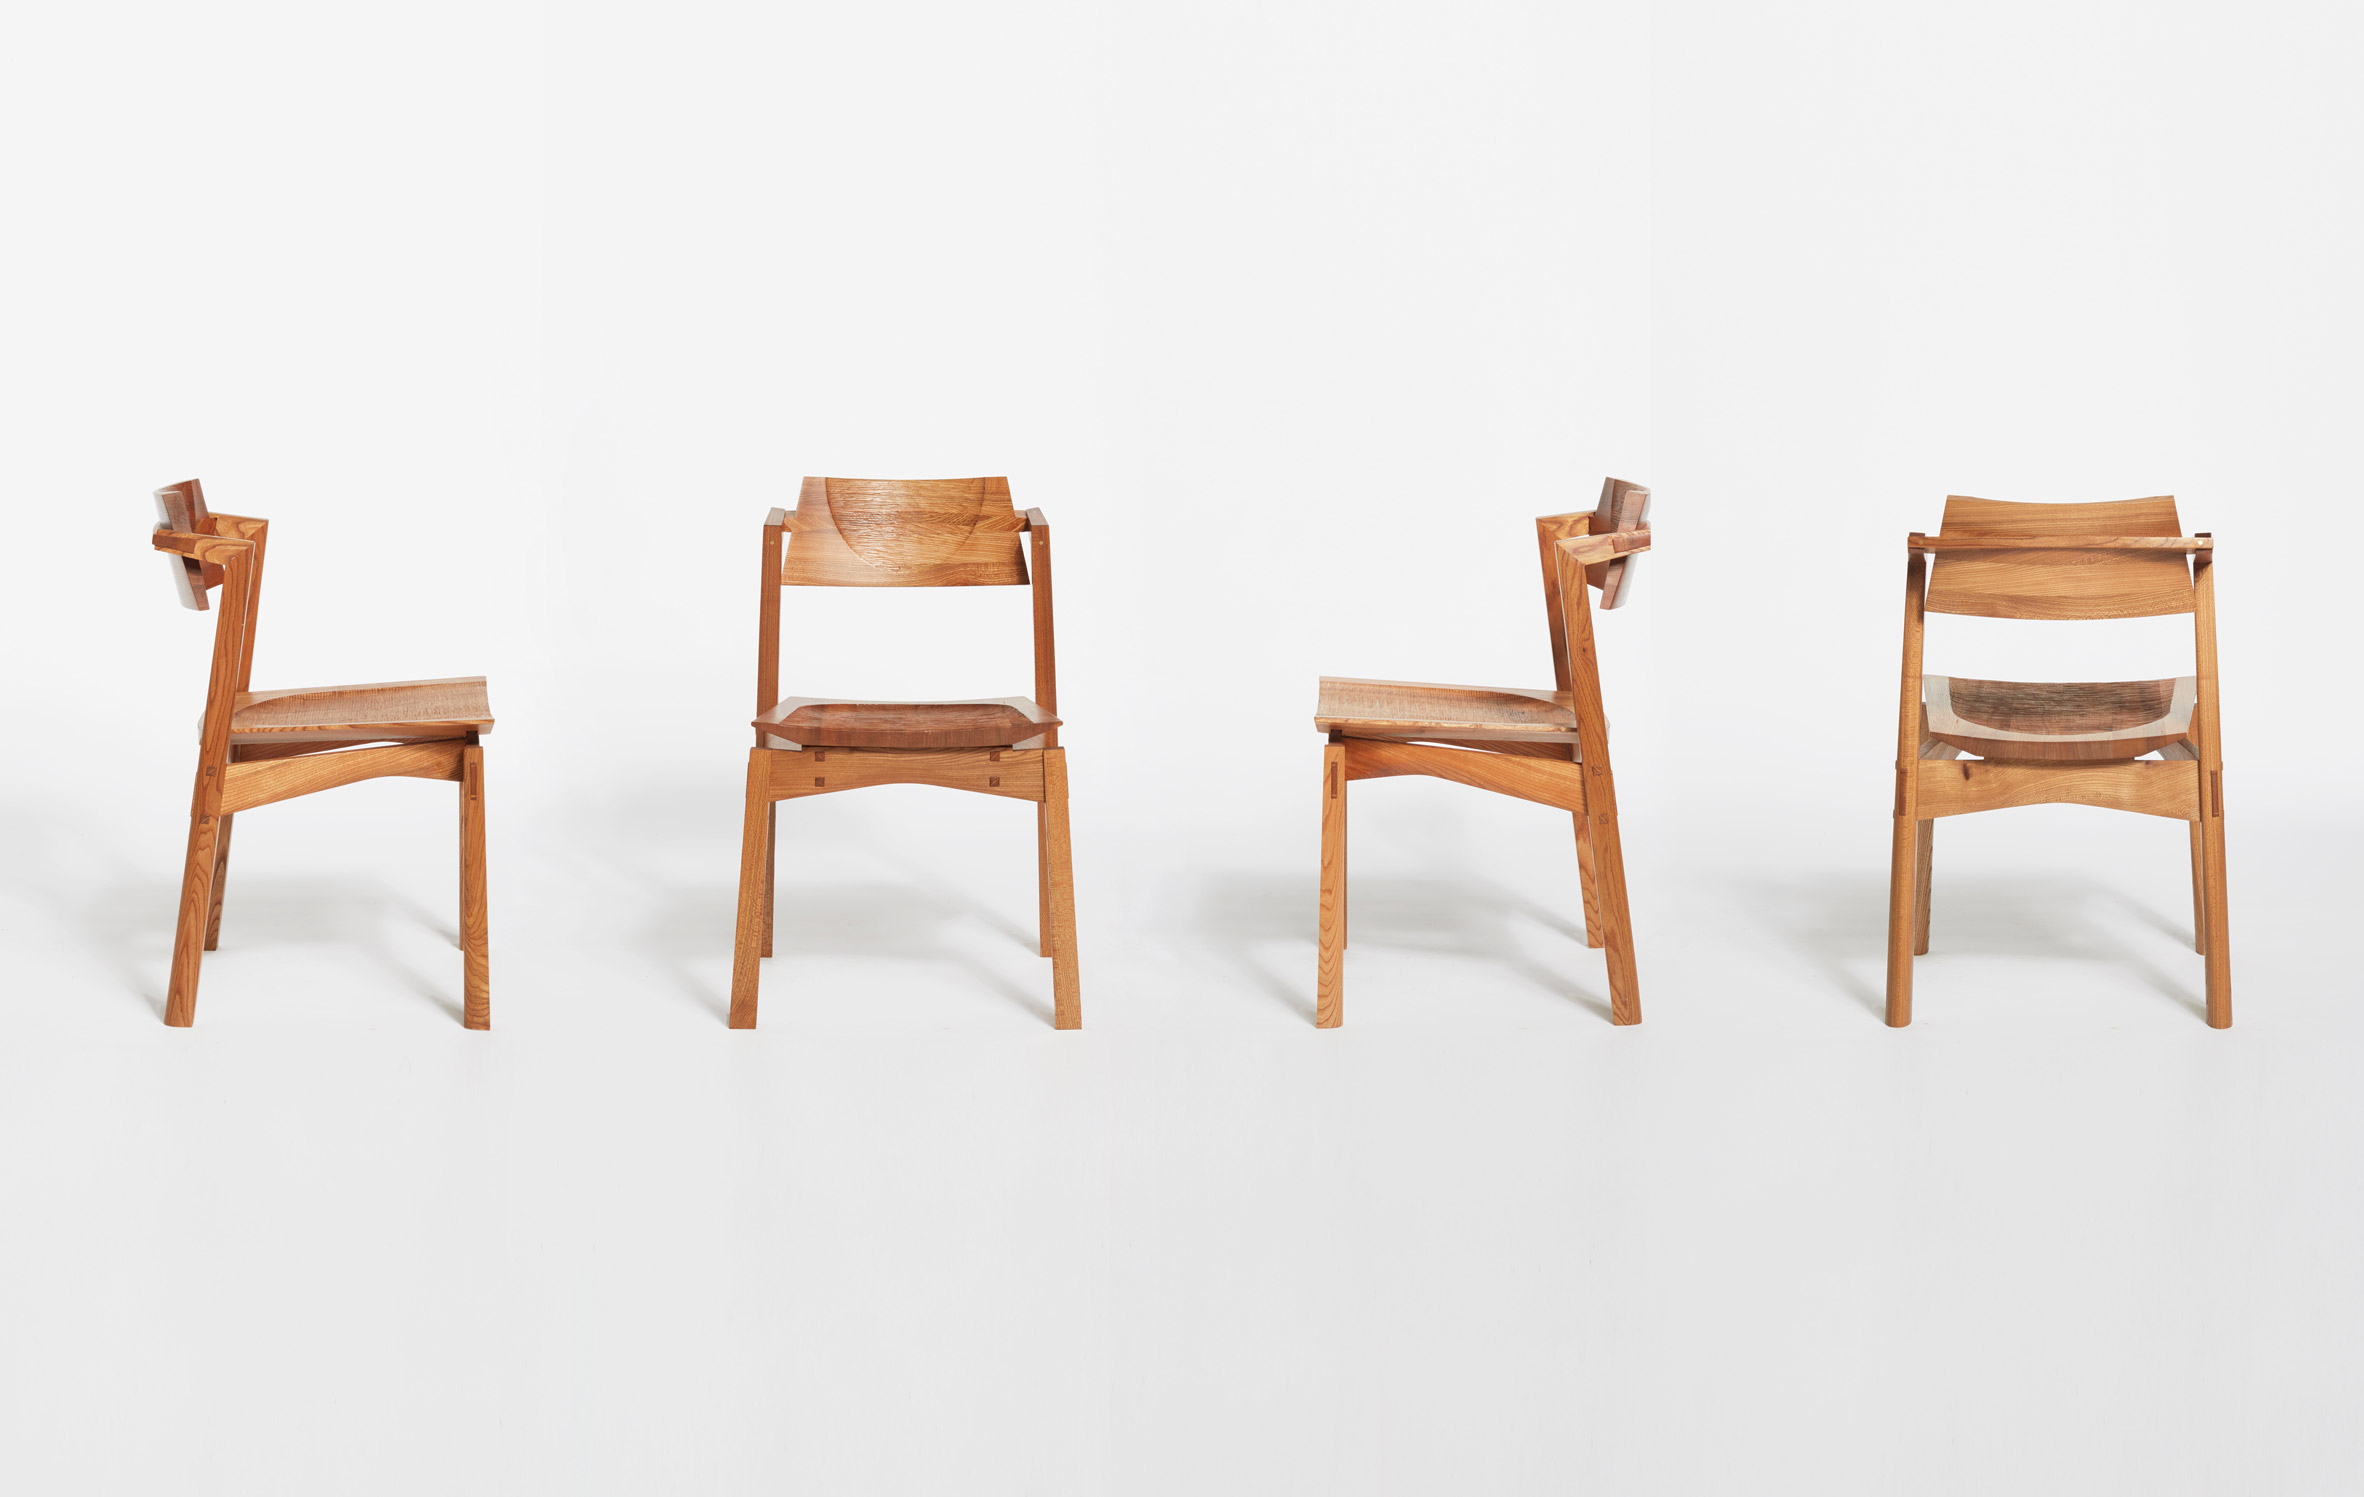 Though made in European wood, the chairs are inspired by Japanese furniture